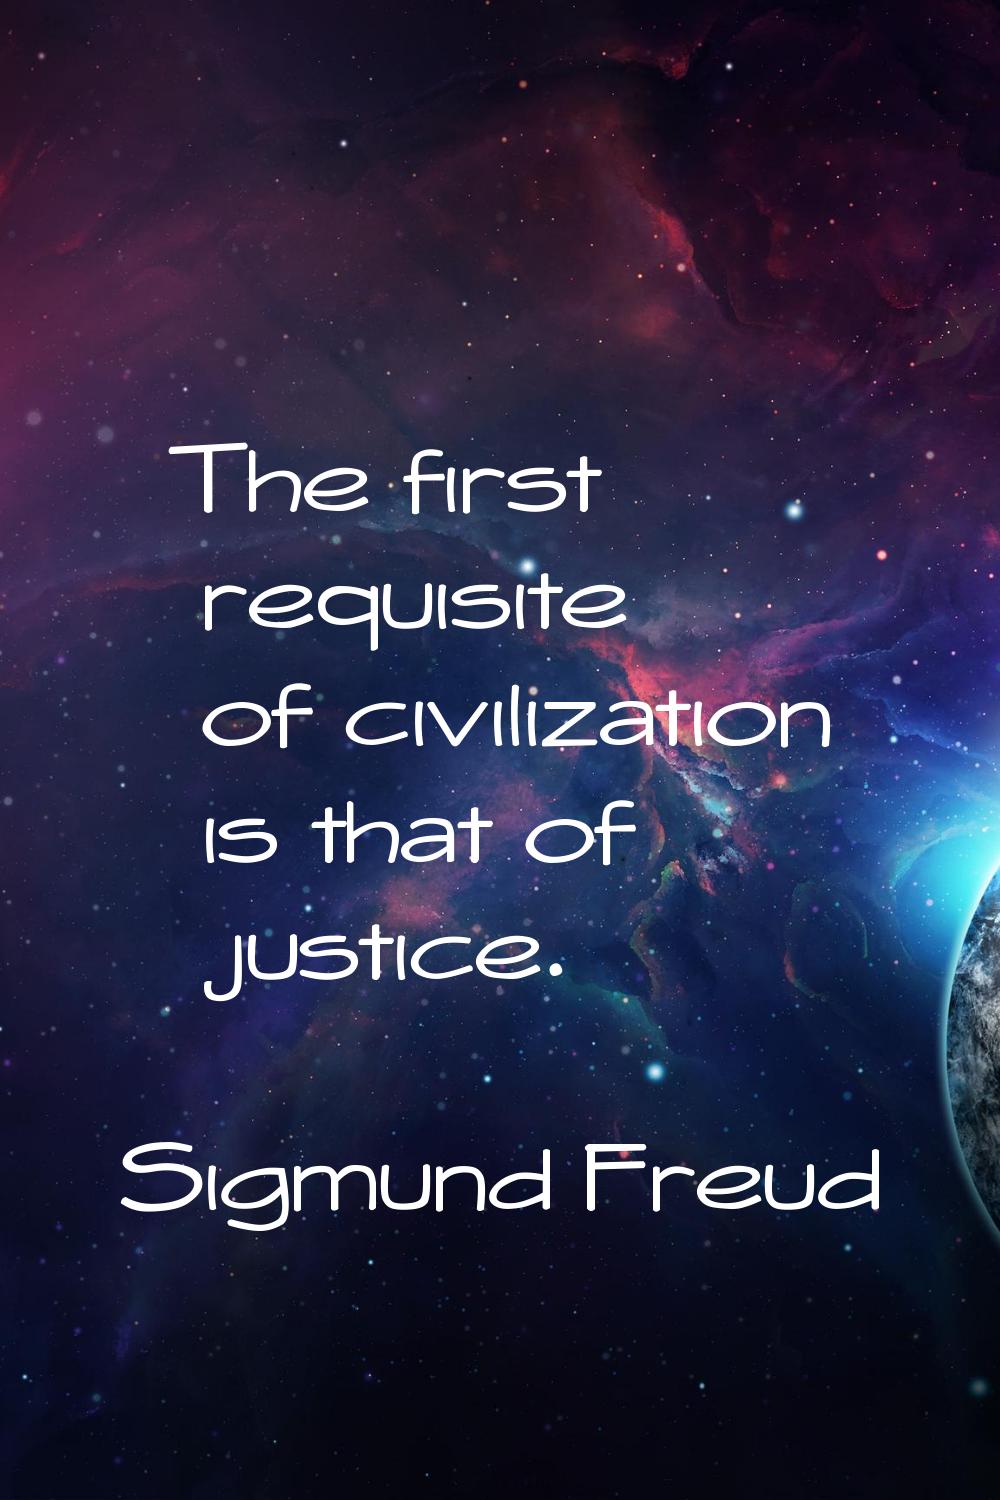 The first requisite of civilization is that of justice.